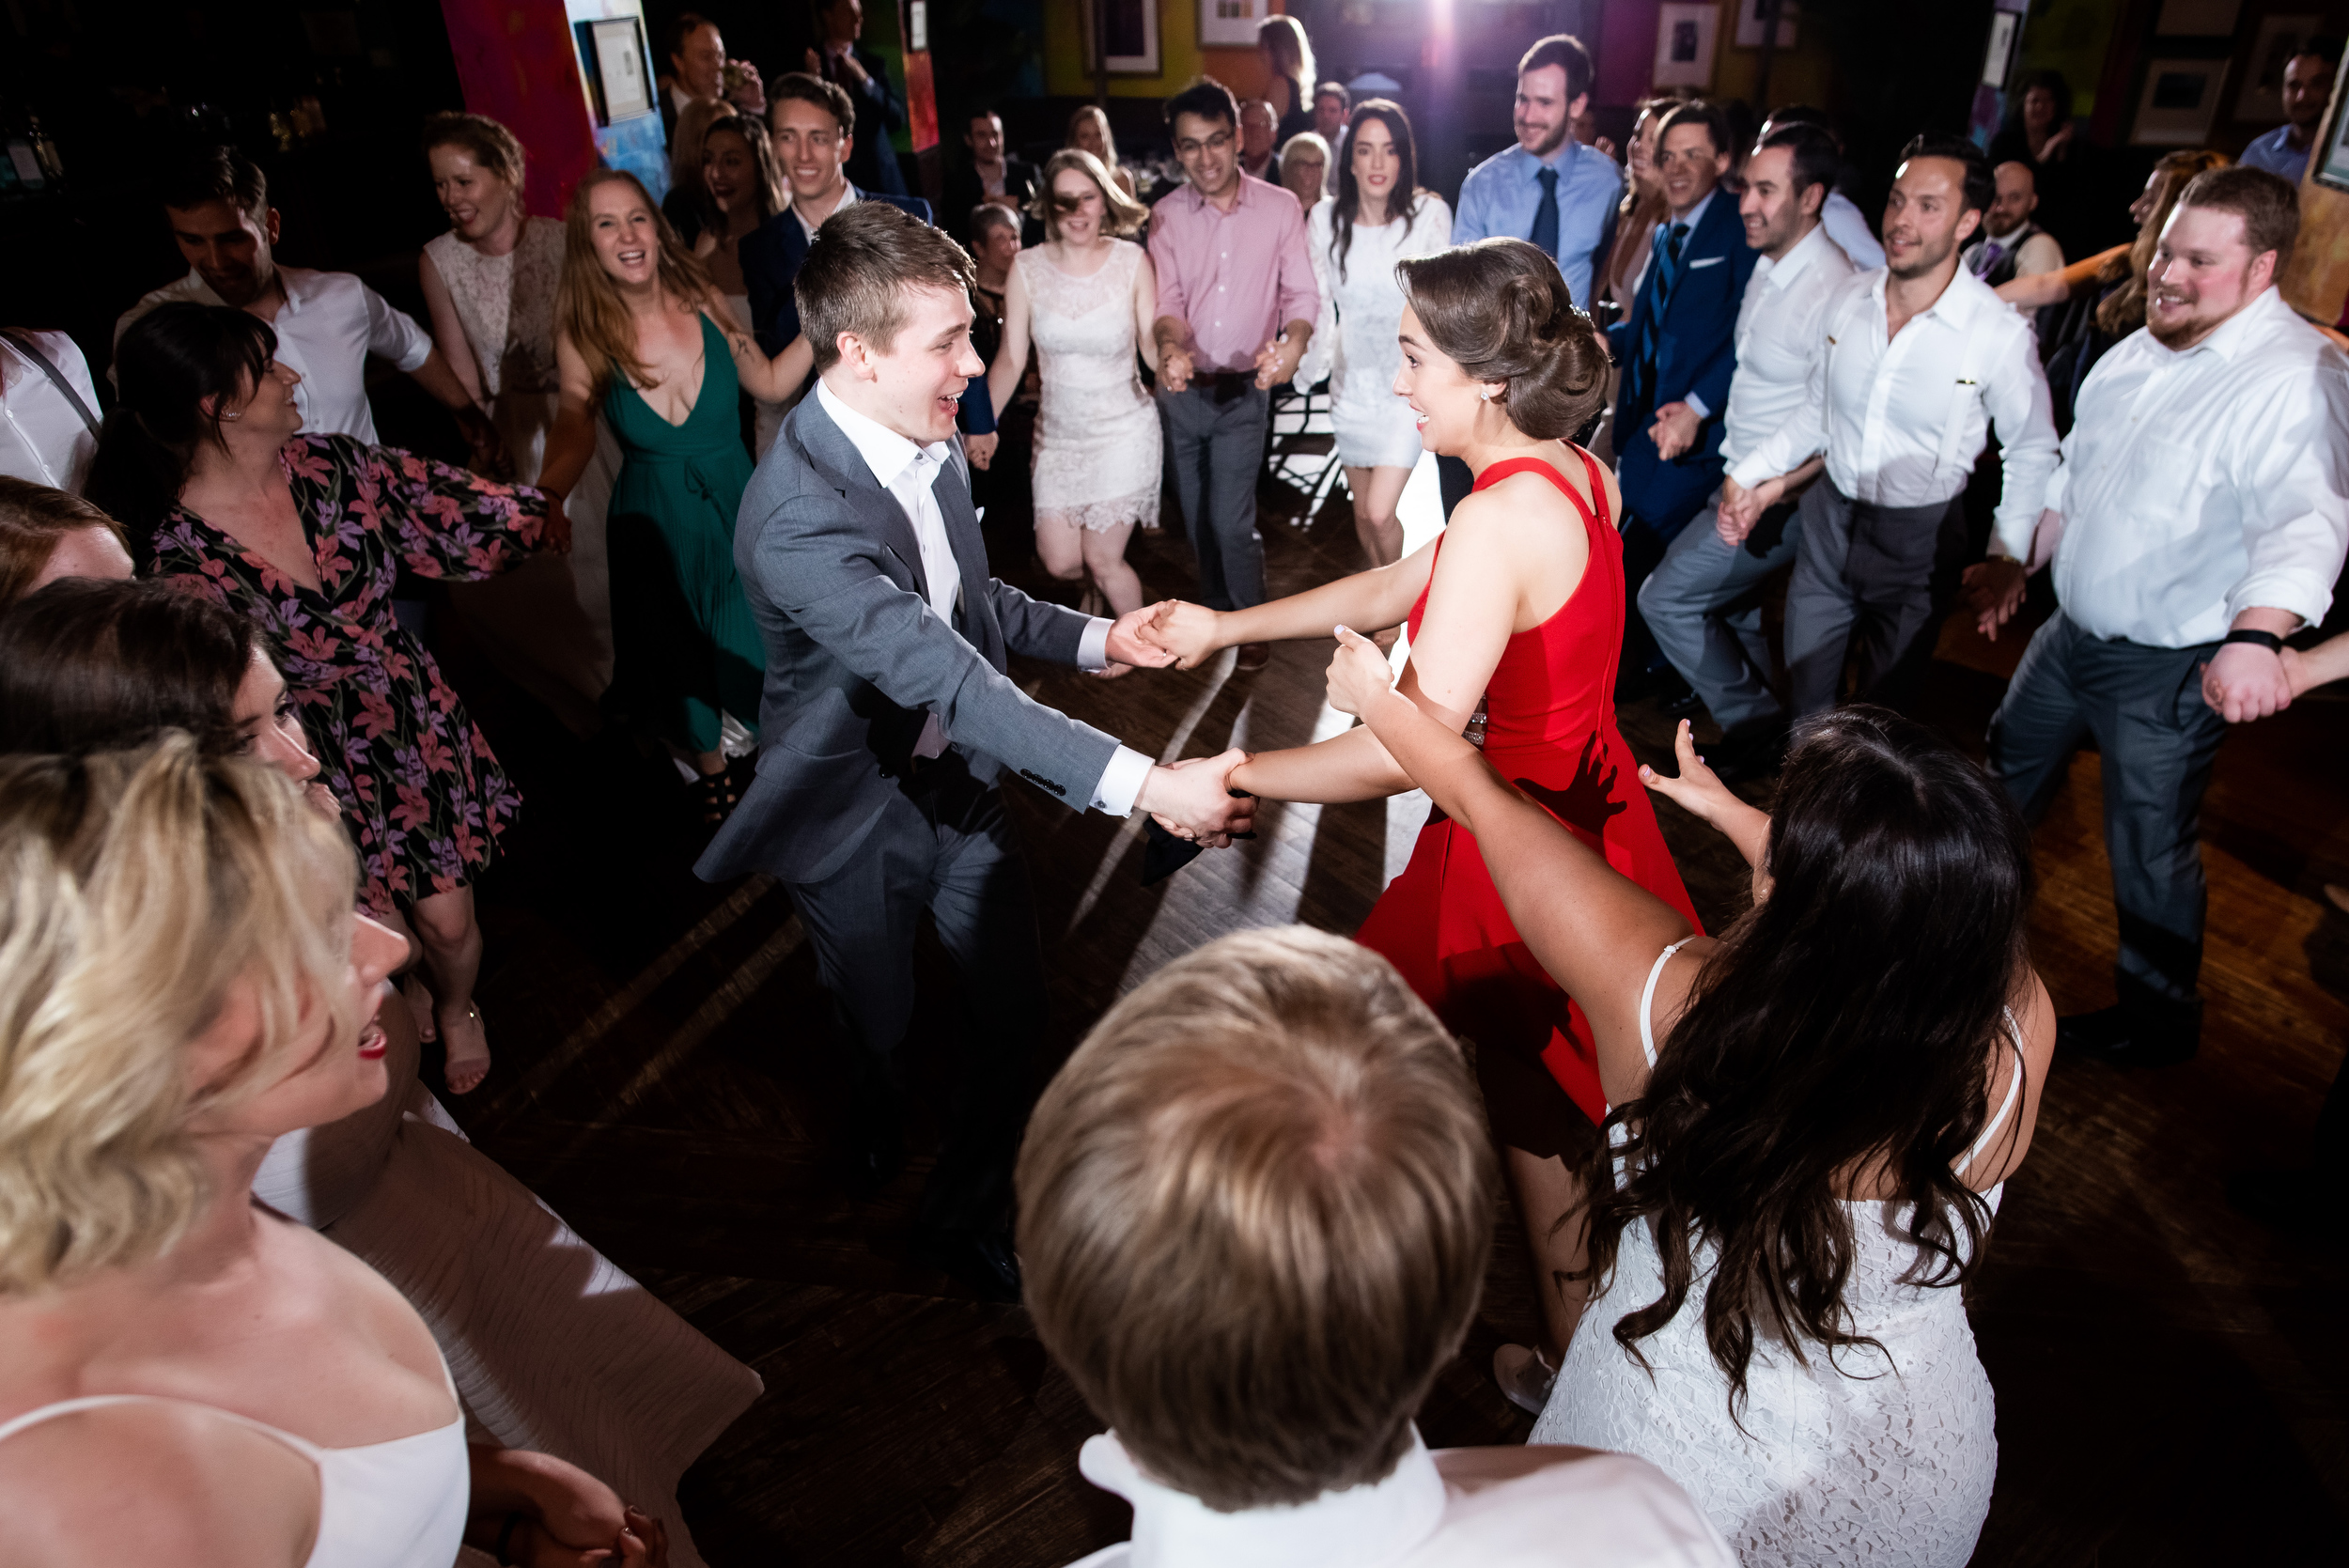 Wedding dance photos: Carnivale Chicago wedding captured by J Brown Photography